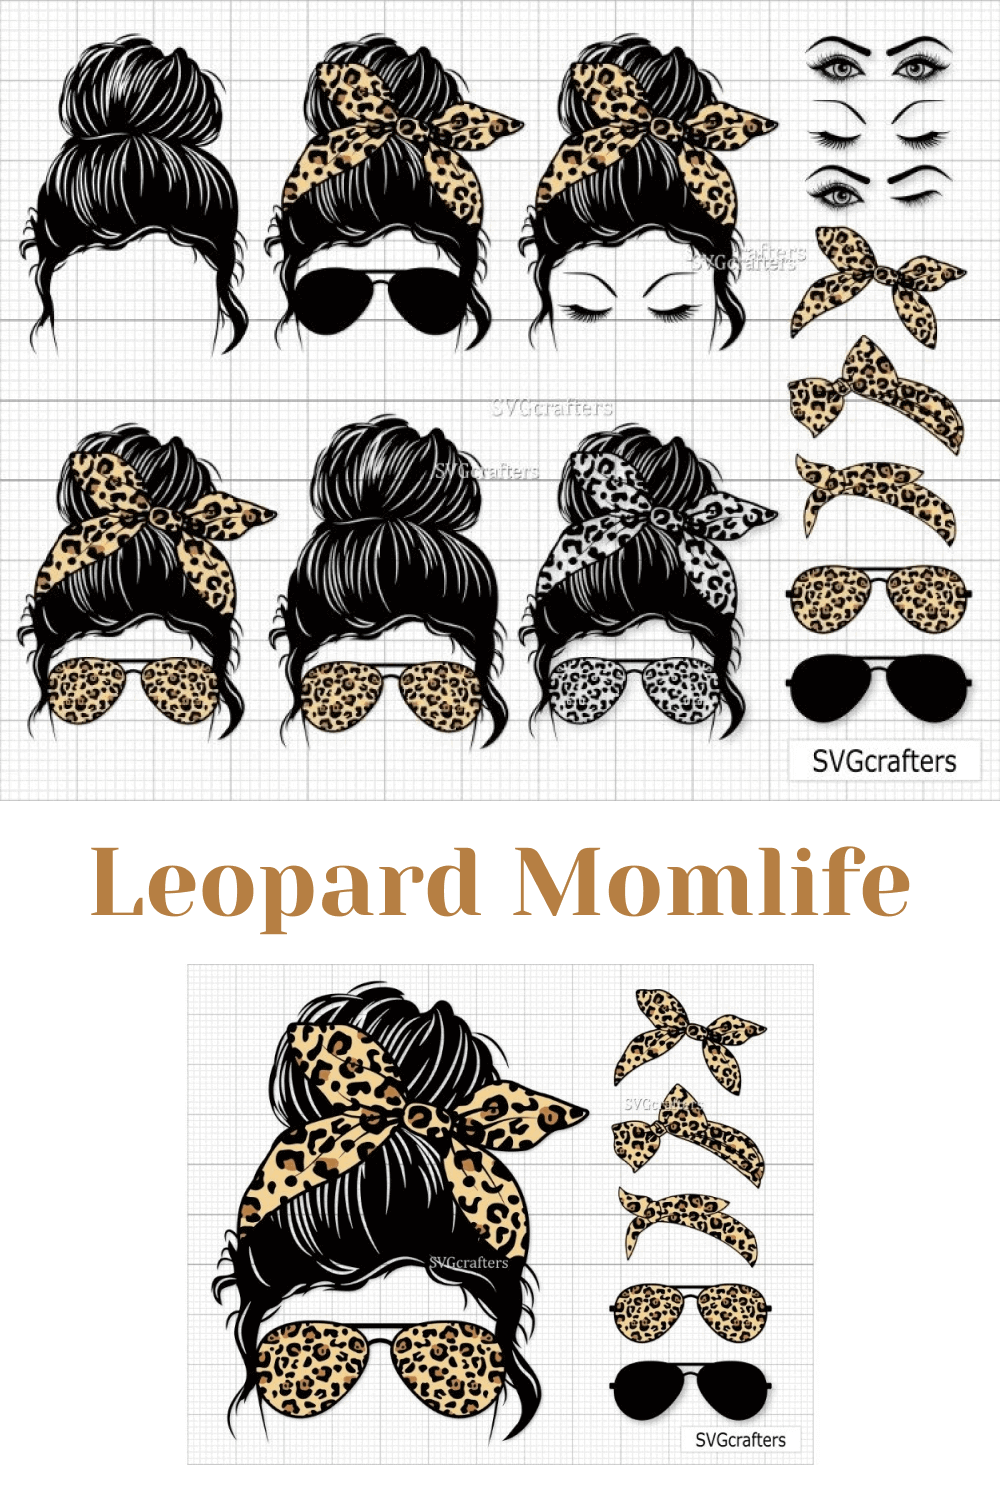 Leopard Momlife on Things.